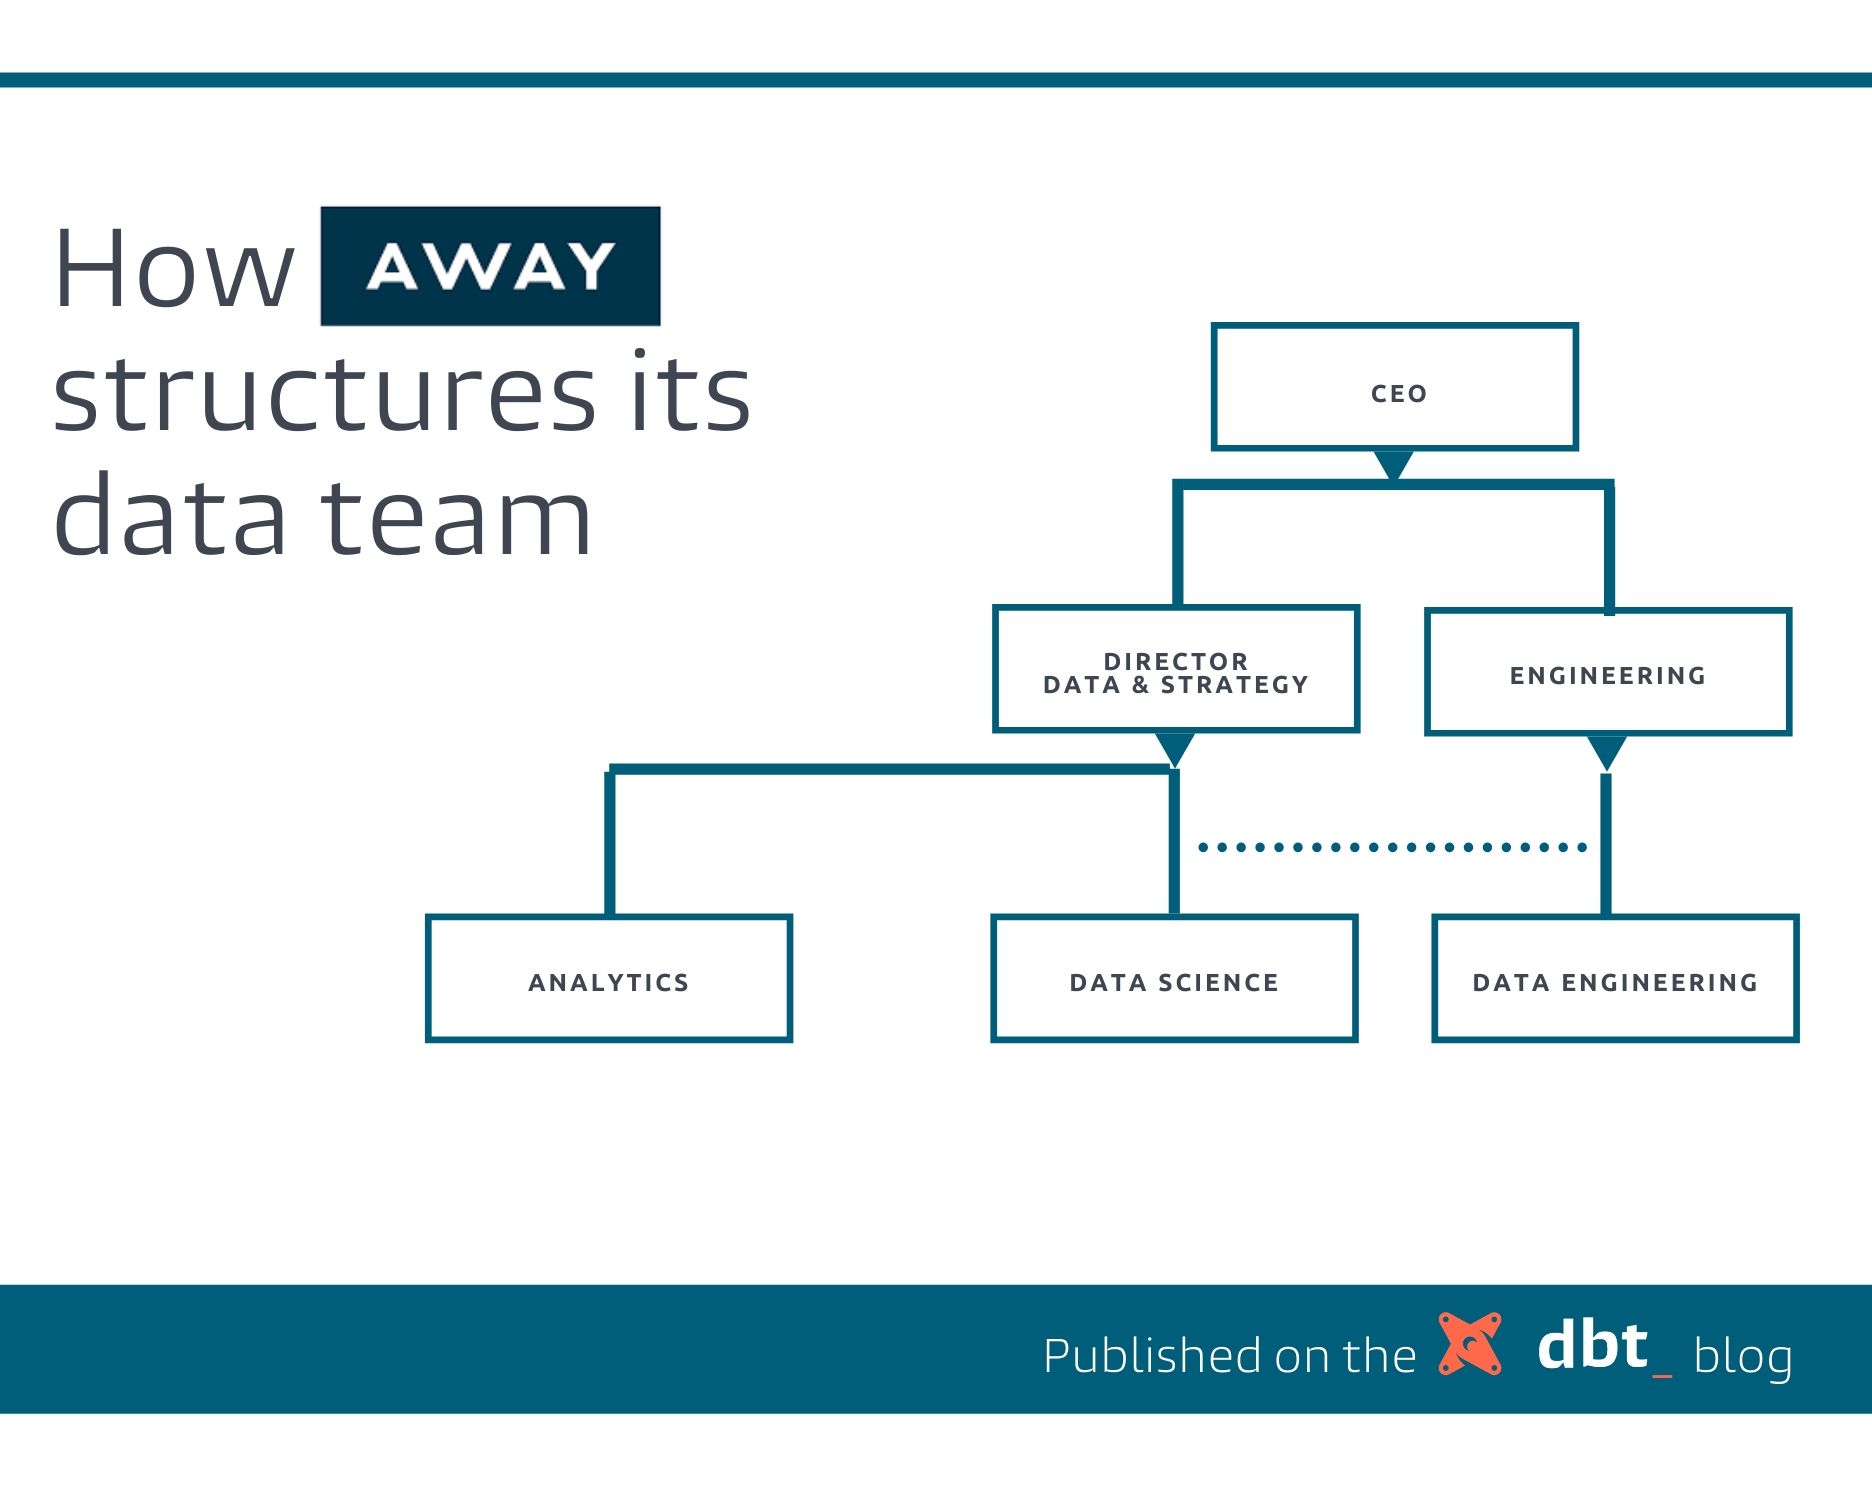 Away's data team org structure